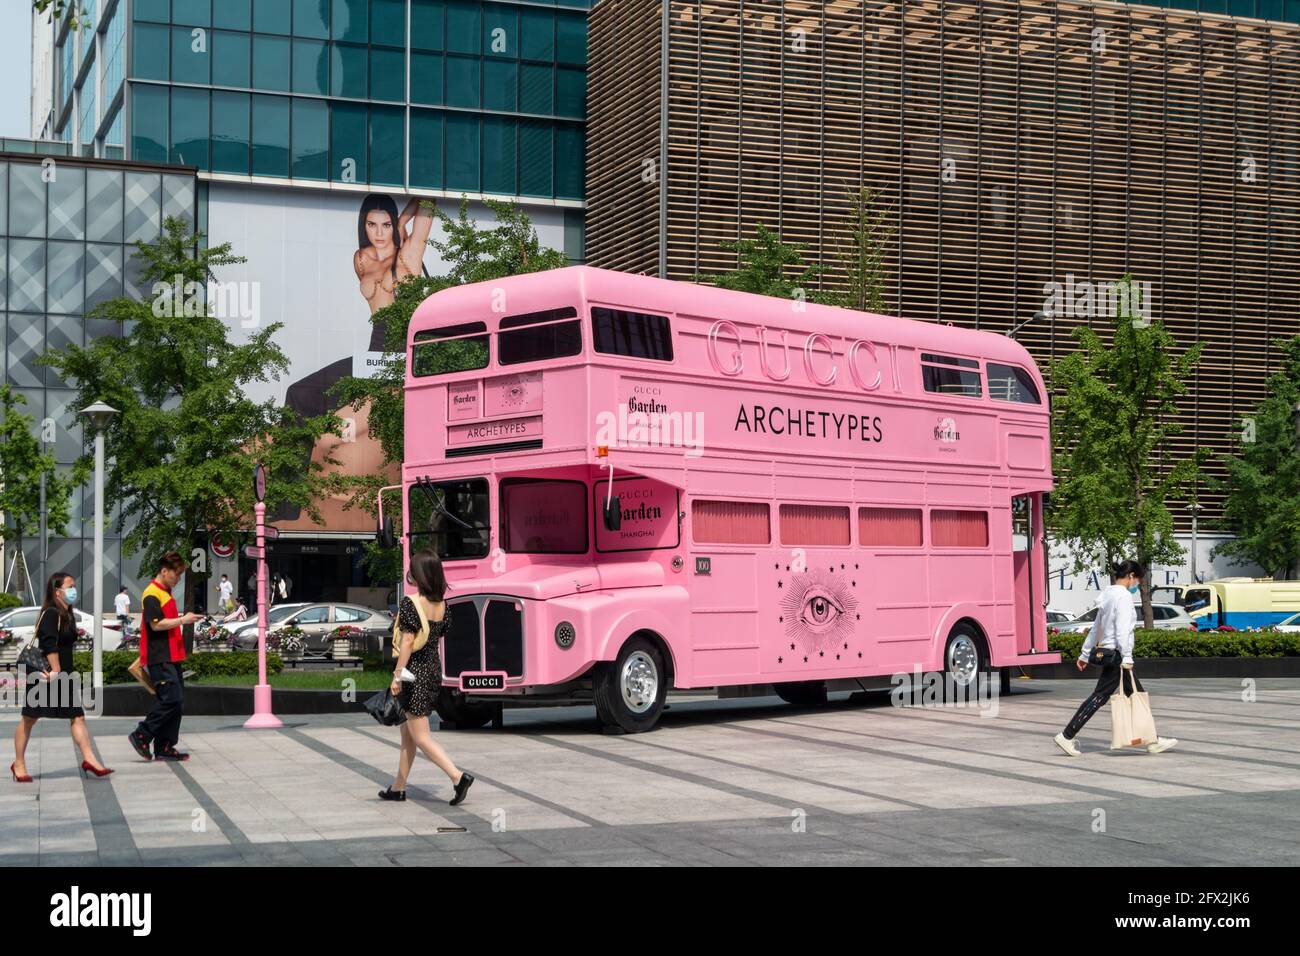 SHANGHAI, CHINA - MAY 25, 2021 - A double-decker bus with a vintage look  and pink color is parked on the street of Jing 'an Temple in Shanghai,  China, May 25, 2021.